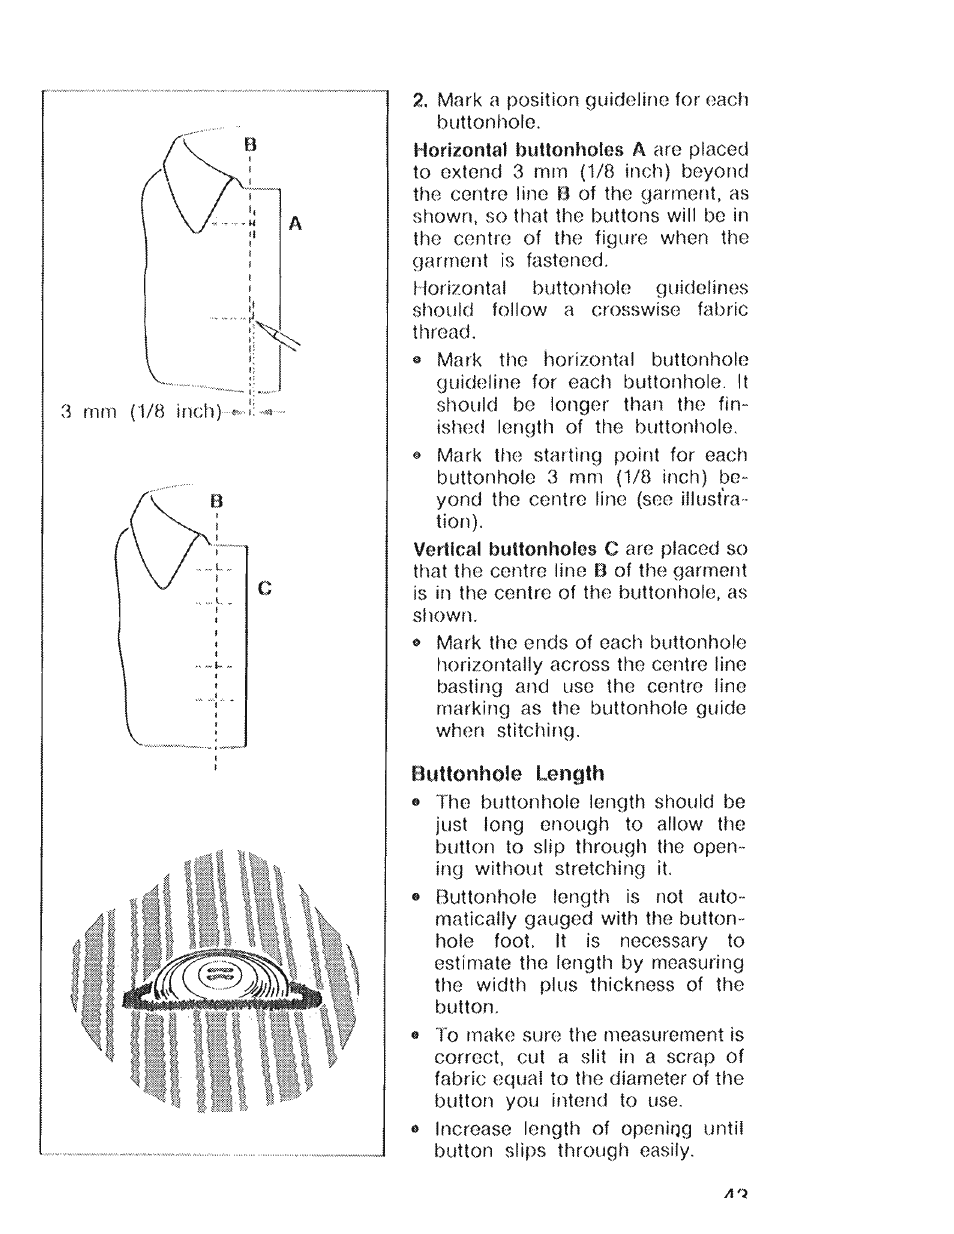 Buttonhole length | SINGER 4022 User Manual | Page 45 / 56